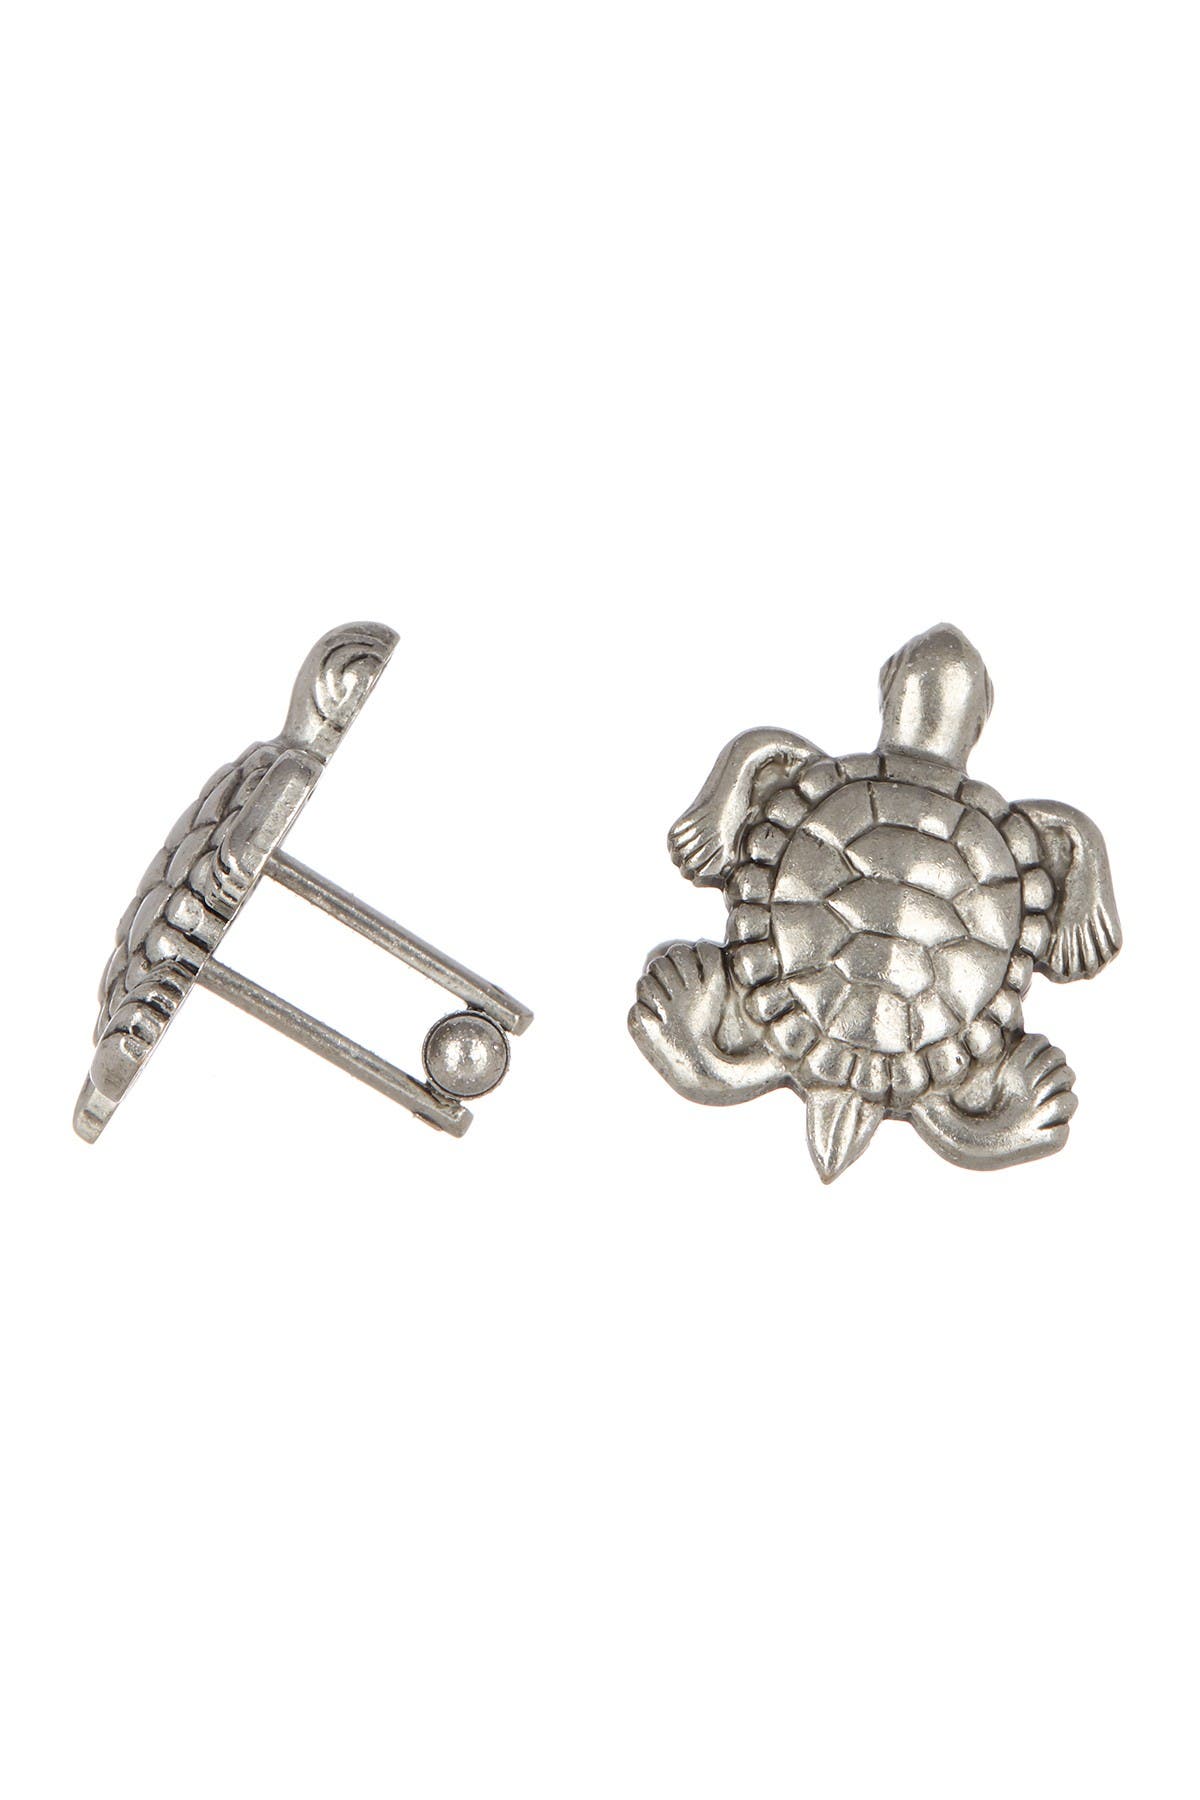 Link-up Antique Turtle Cuff Links In Silver